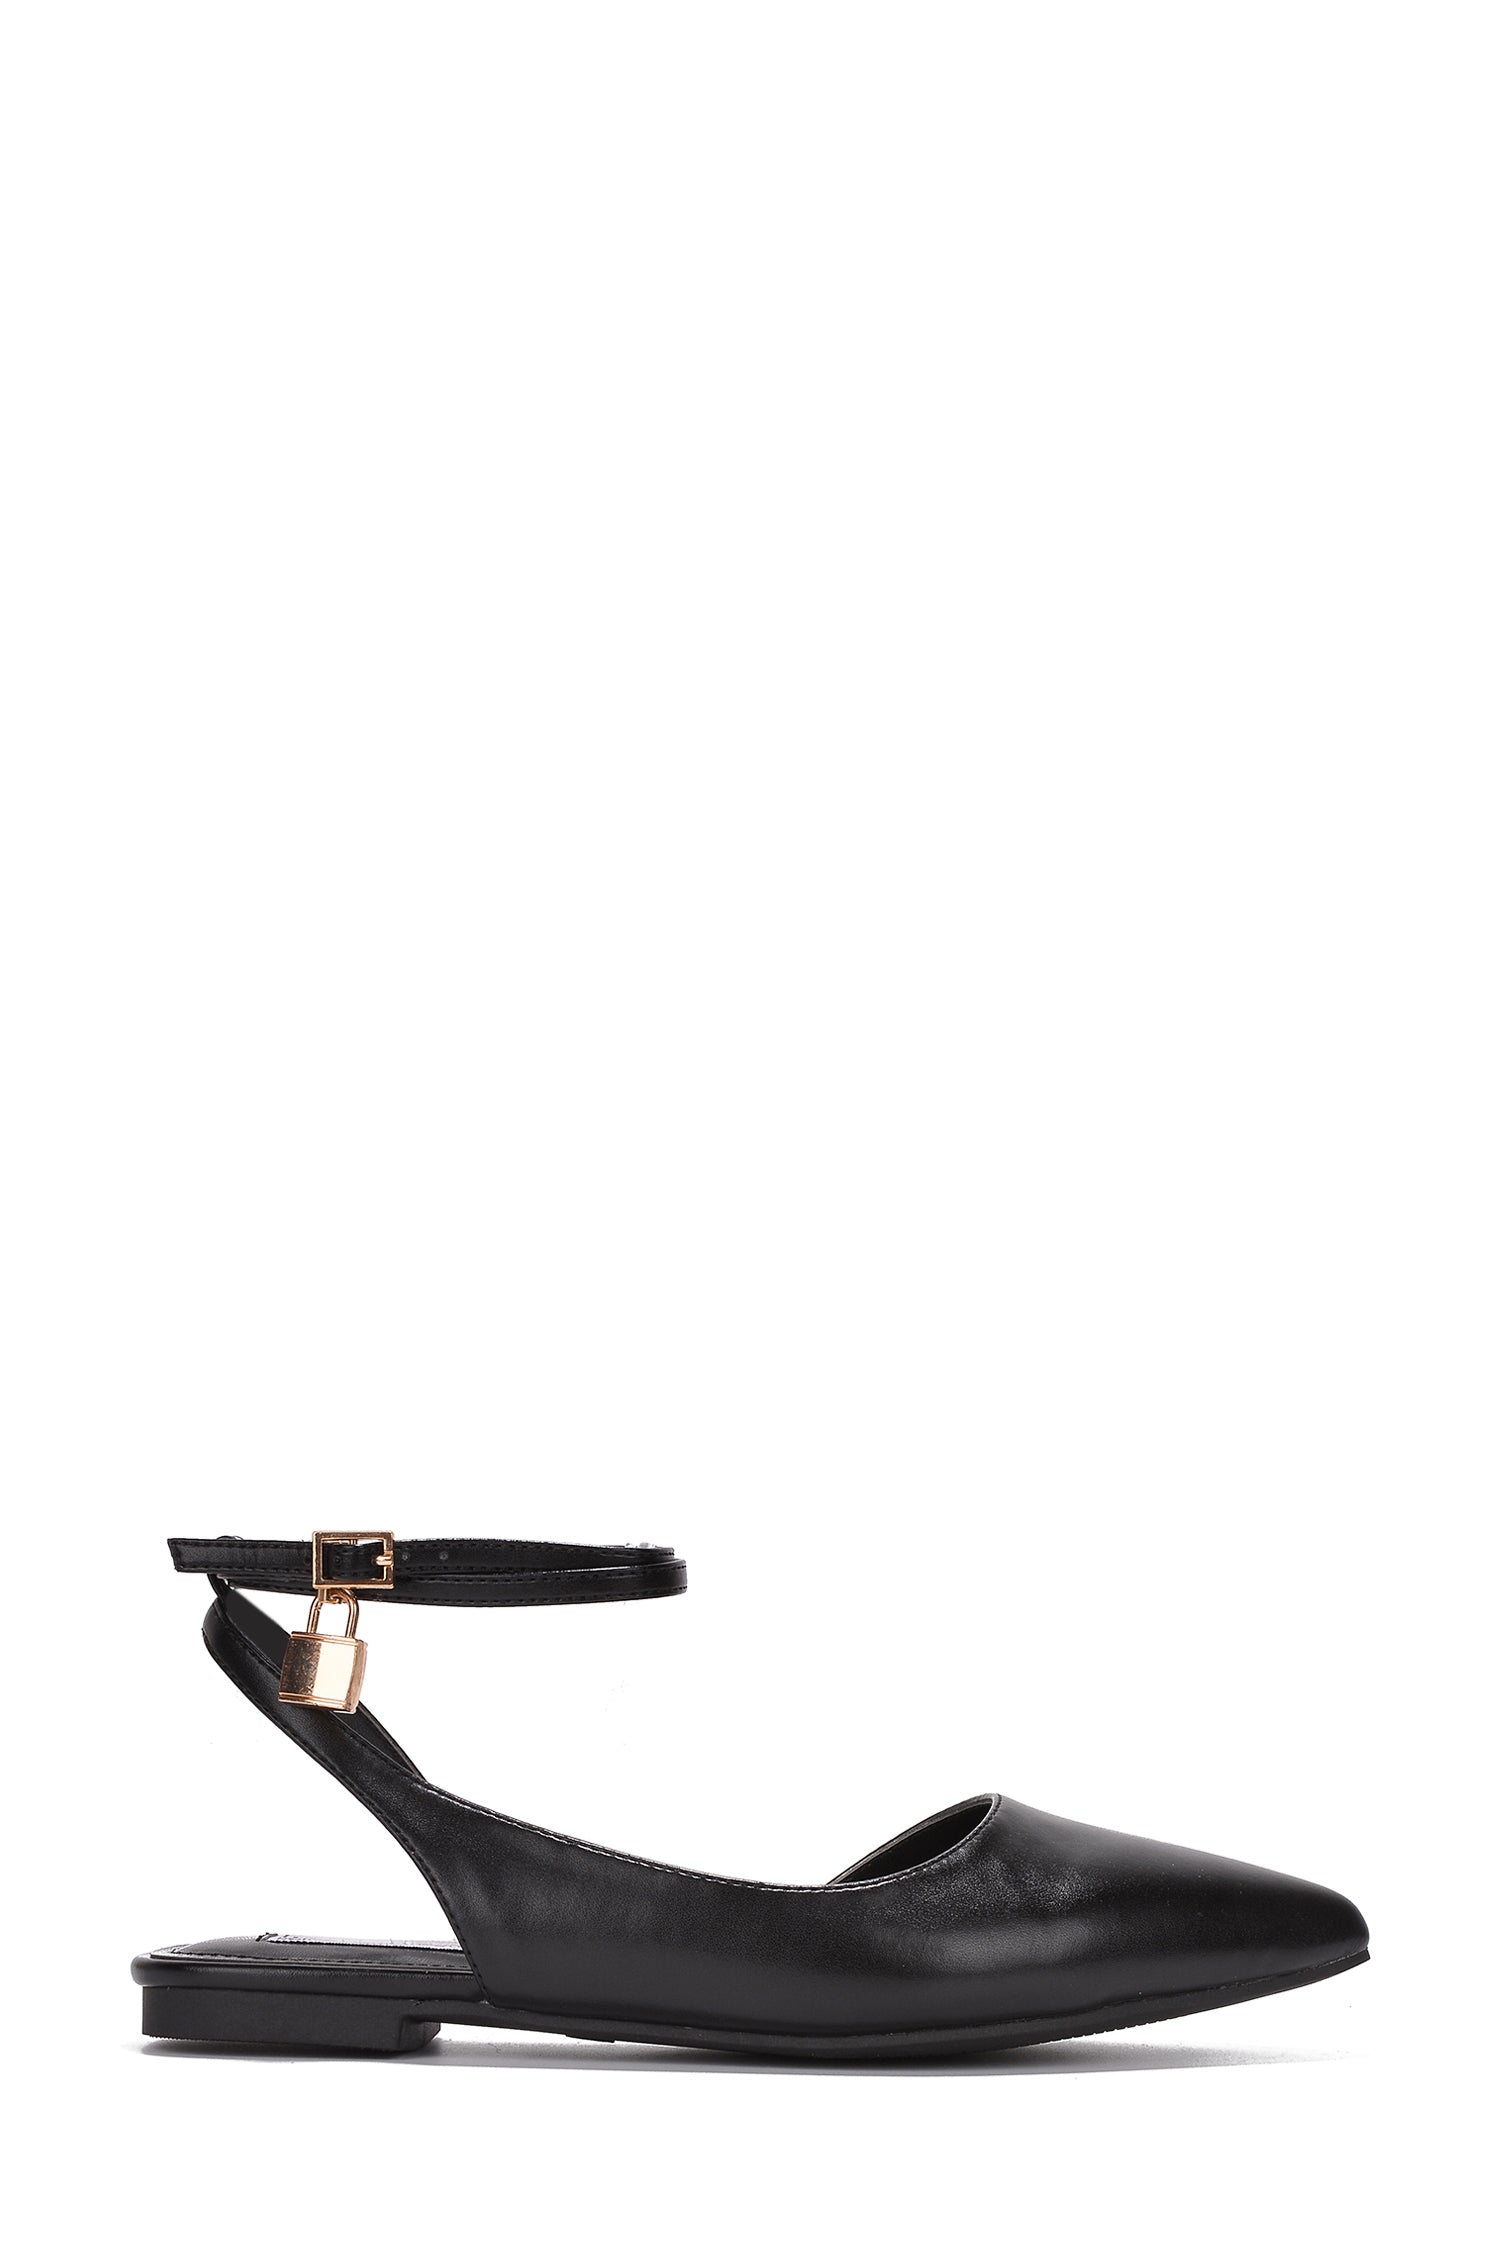 UrbanOG - Winni Pointed Toe Flats with Adjustable Ankle Strap and Lock and - FLATS